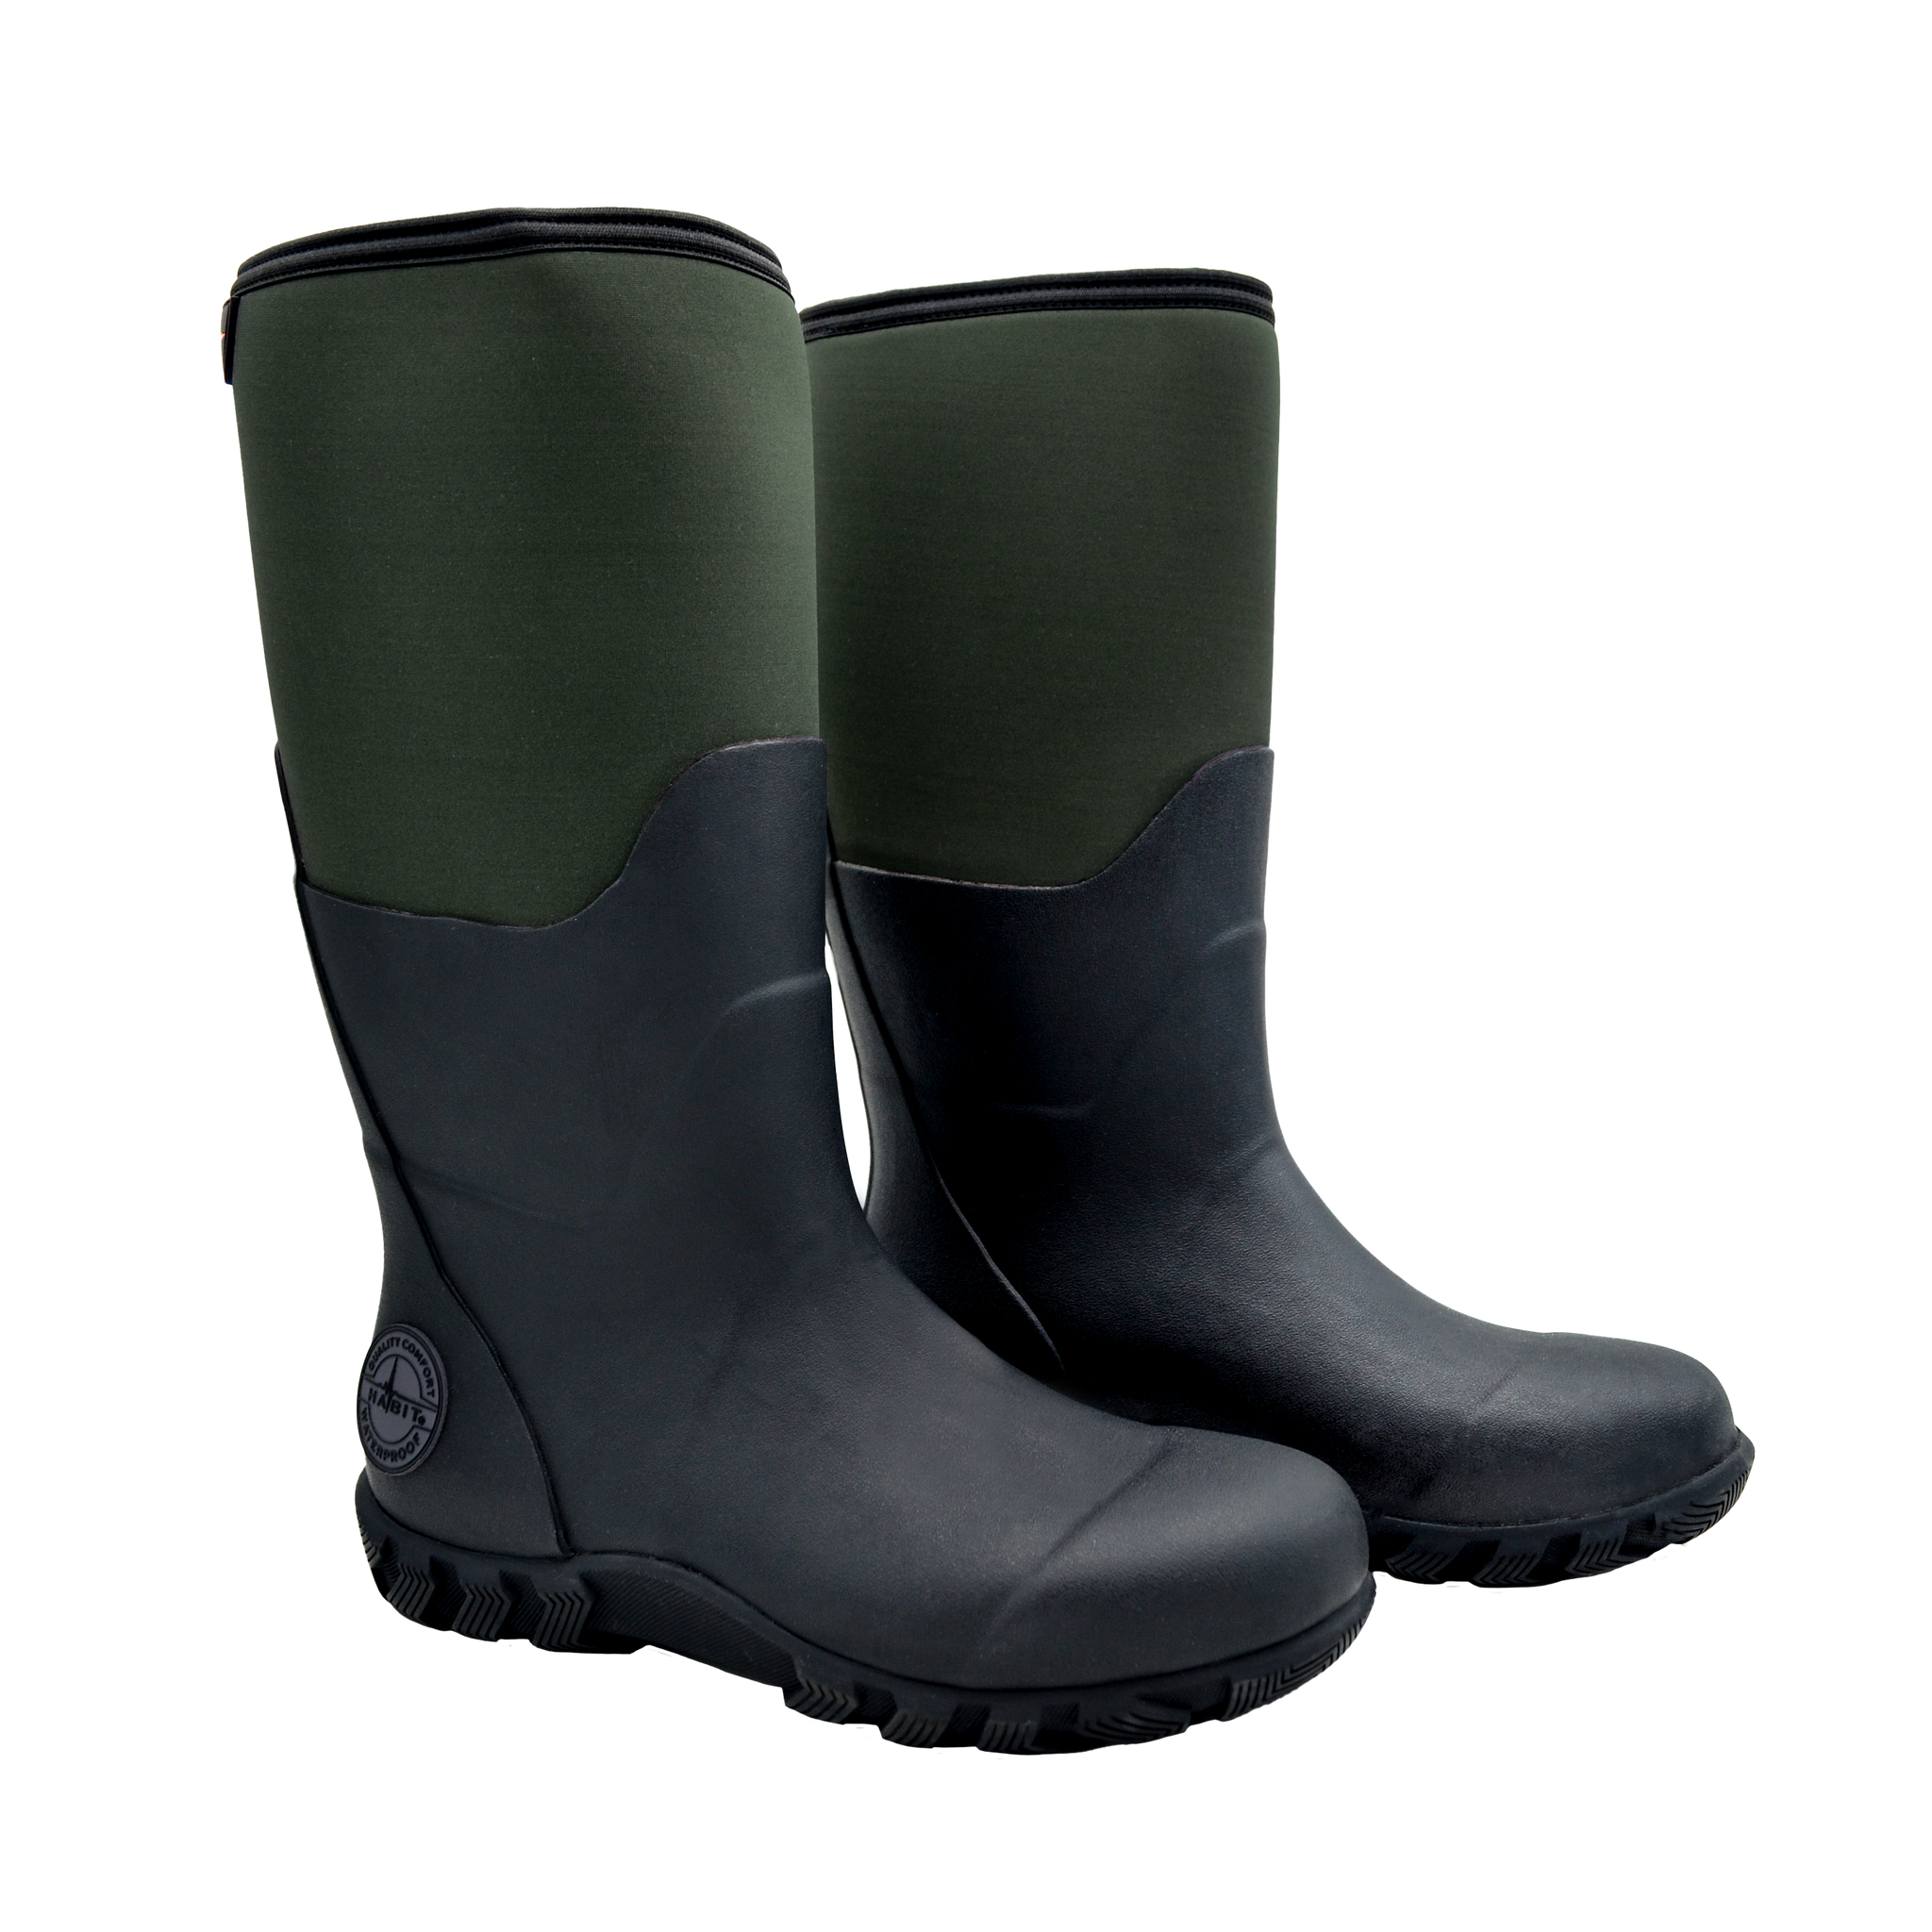 Men’s 15" Waterproof All-Weather Rubber Boots Climbing Ivy